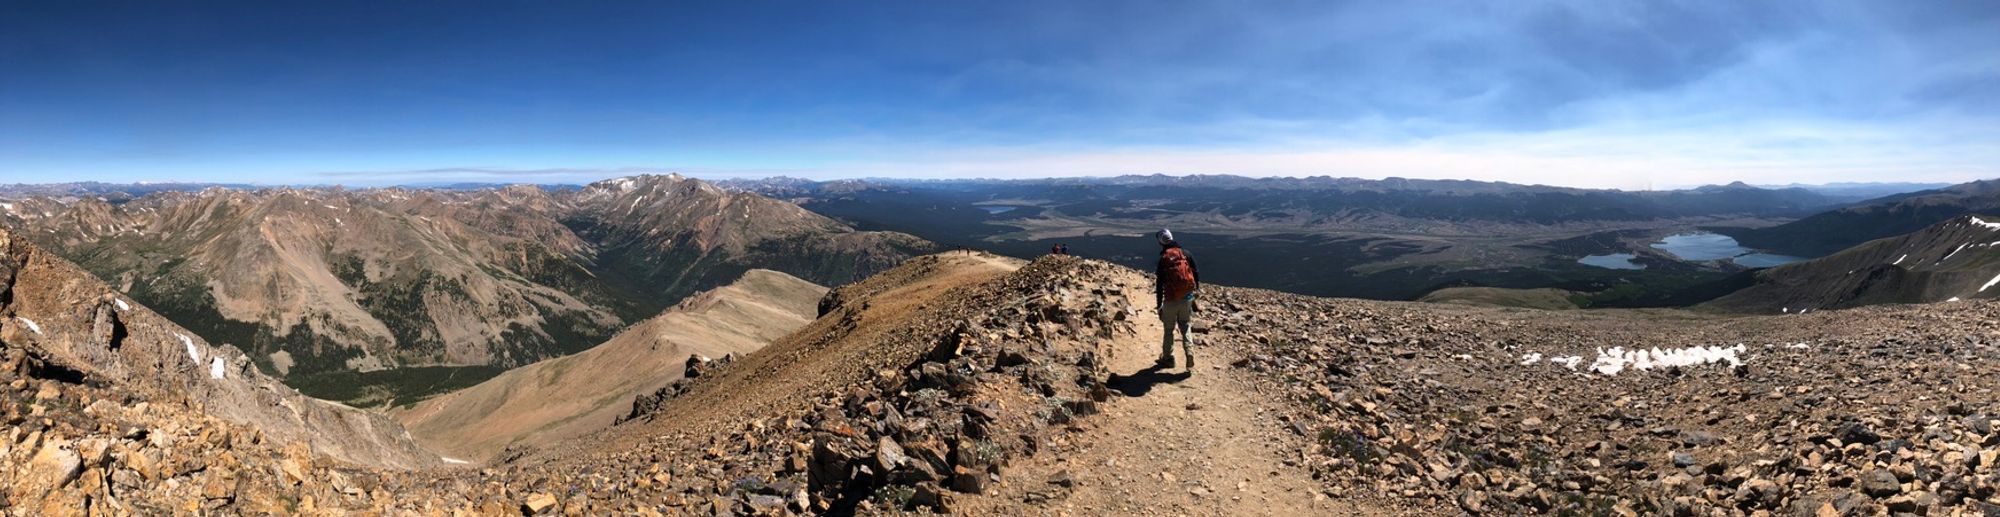 Ultra-wide panorama of Josh on the trail back down from the summit